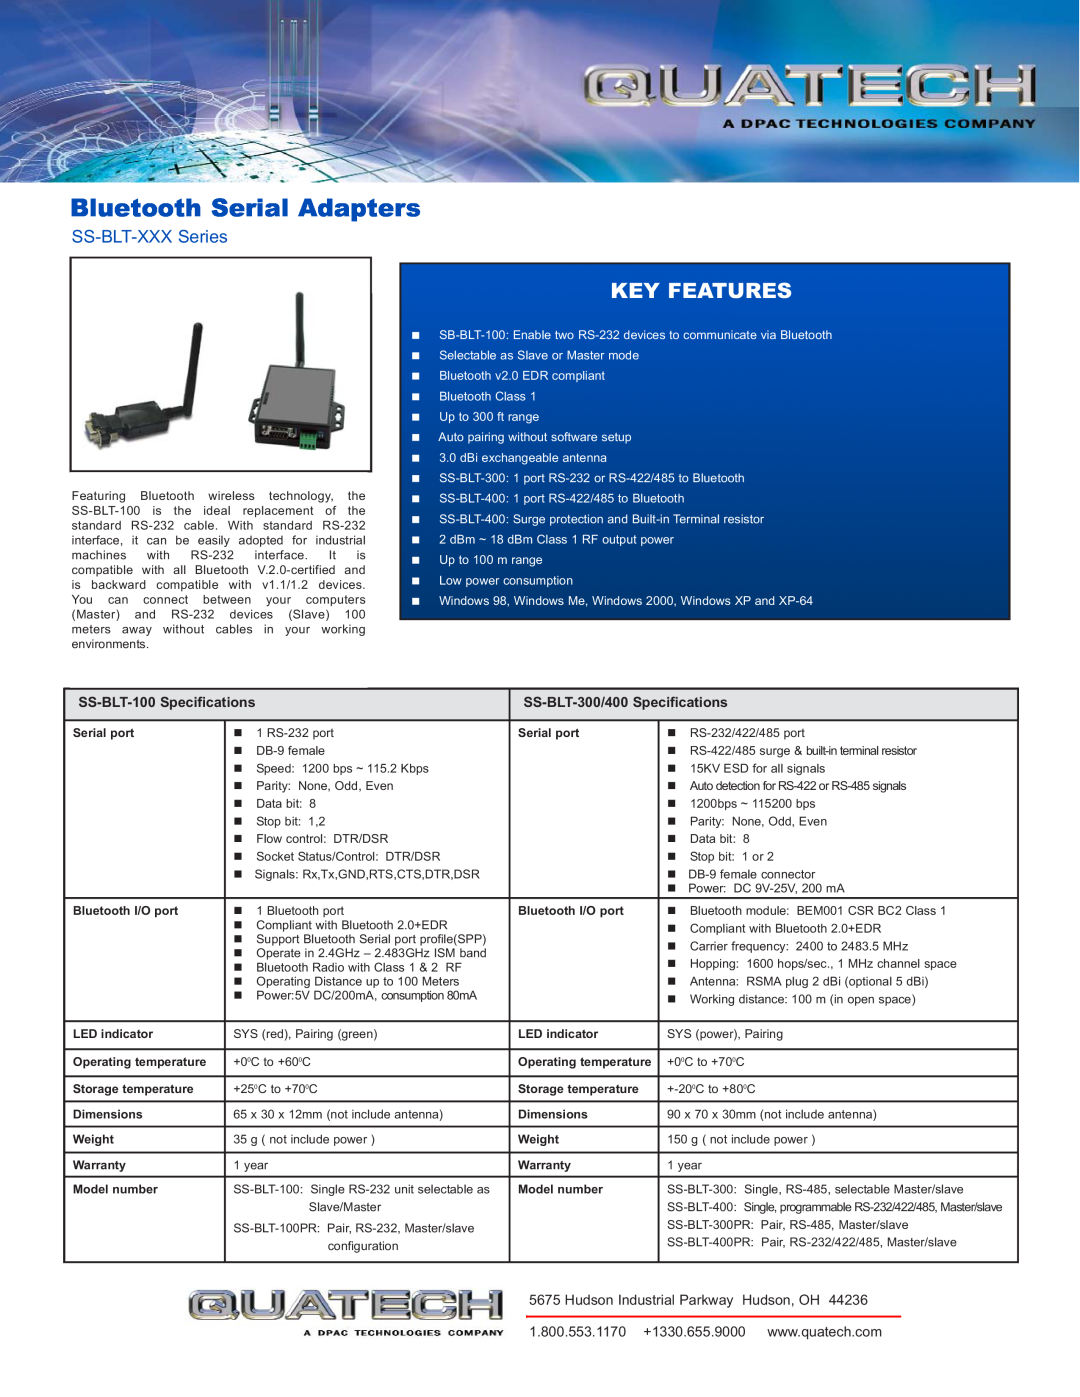 Quatech SS-BLT-XXX Series specifications Bluetooth Serial Adapters, Key Features, SS-BLT-100 Specifications 